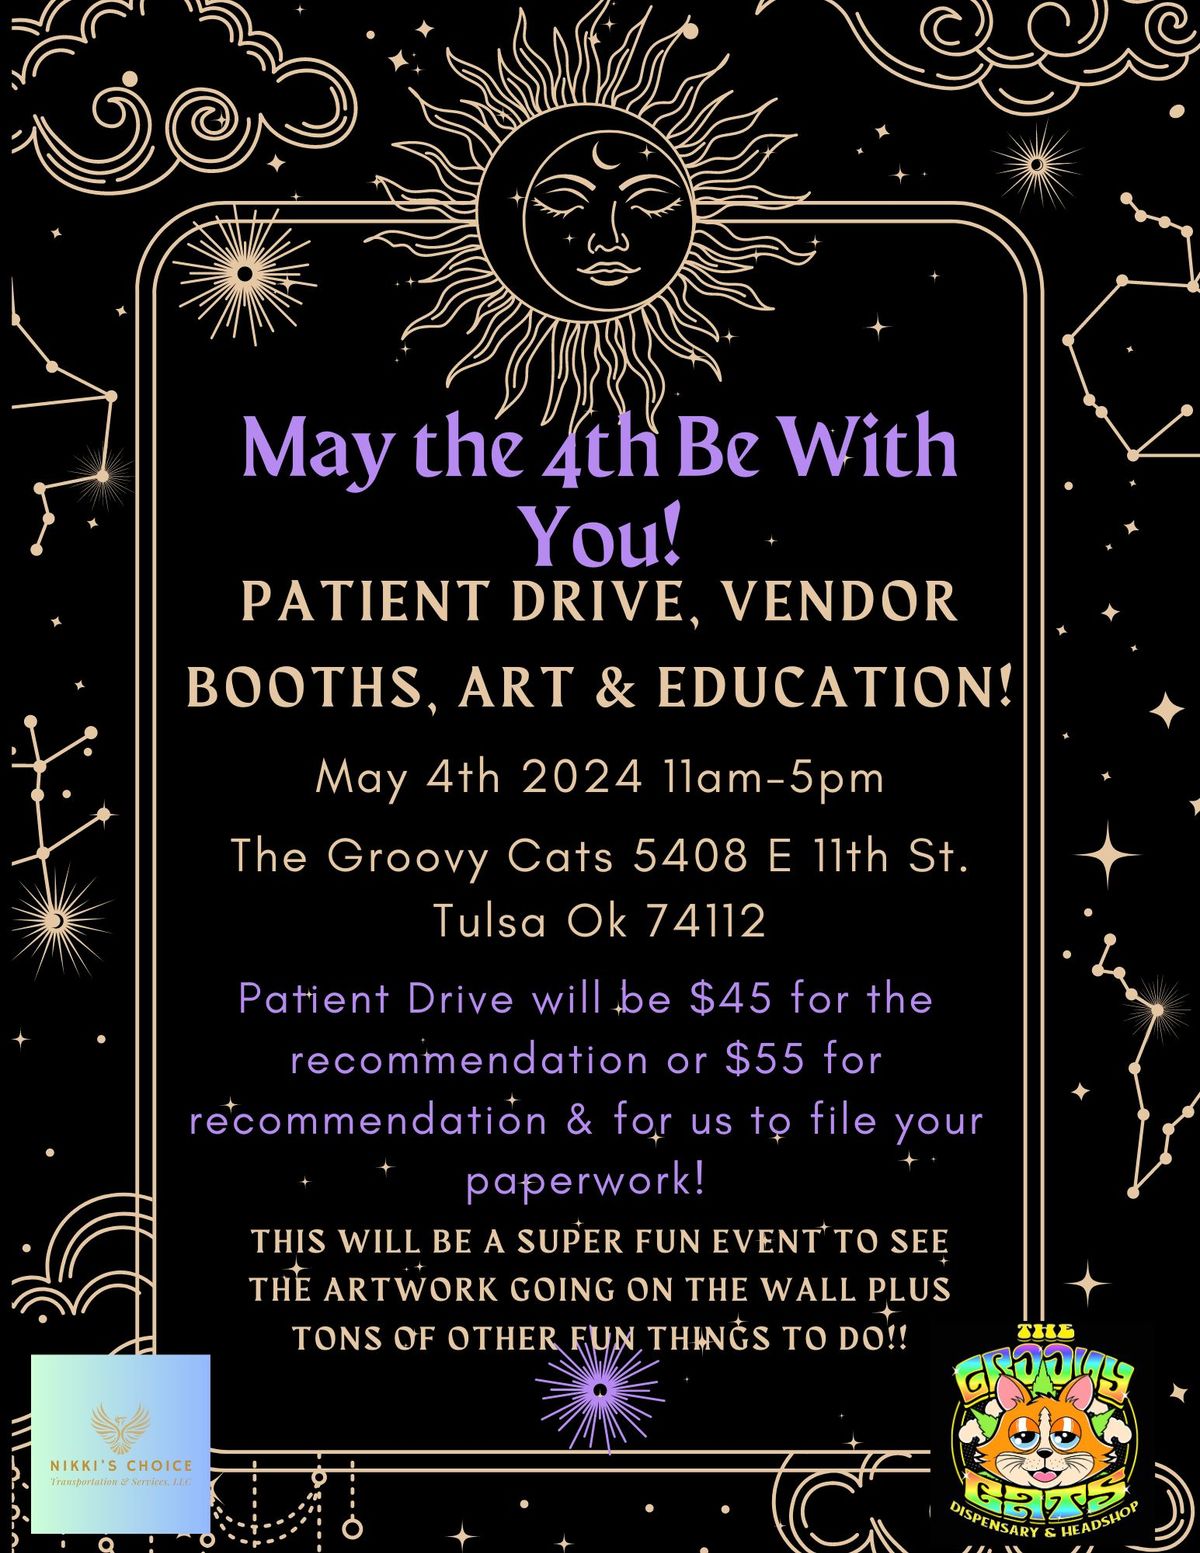 May the 4th Be With You Patient Drive, Education & Art Event!